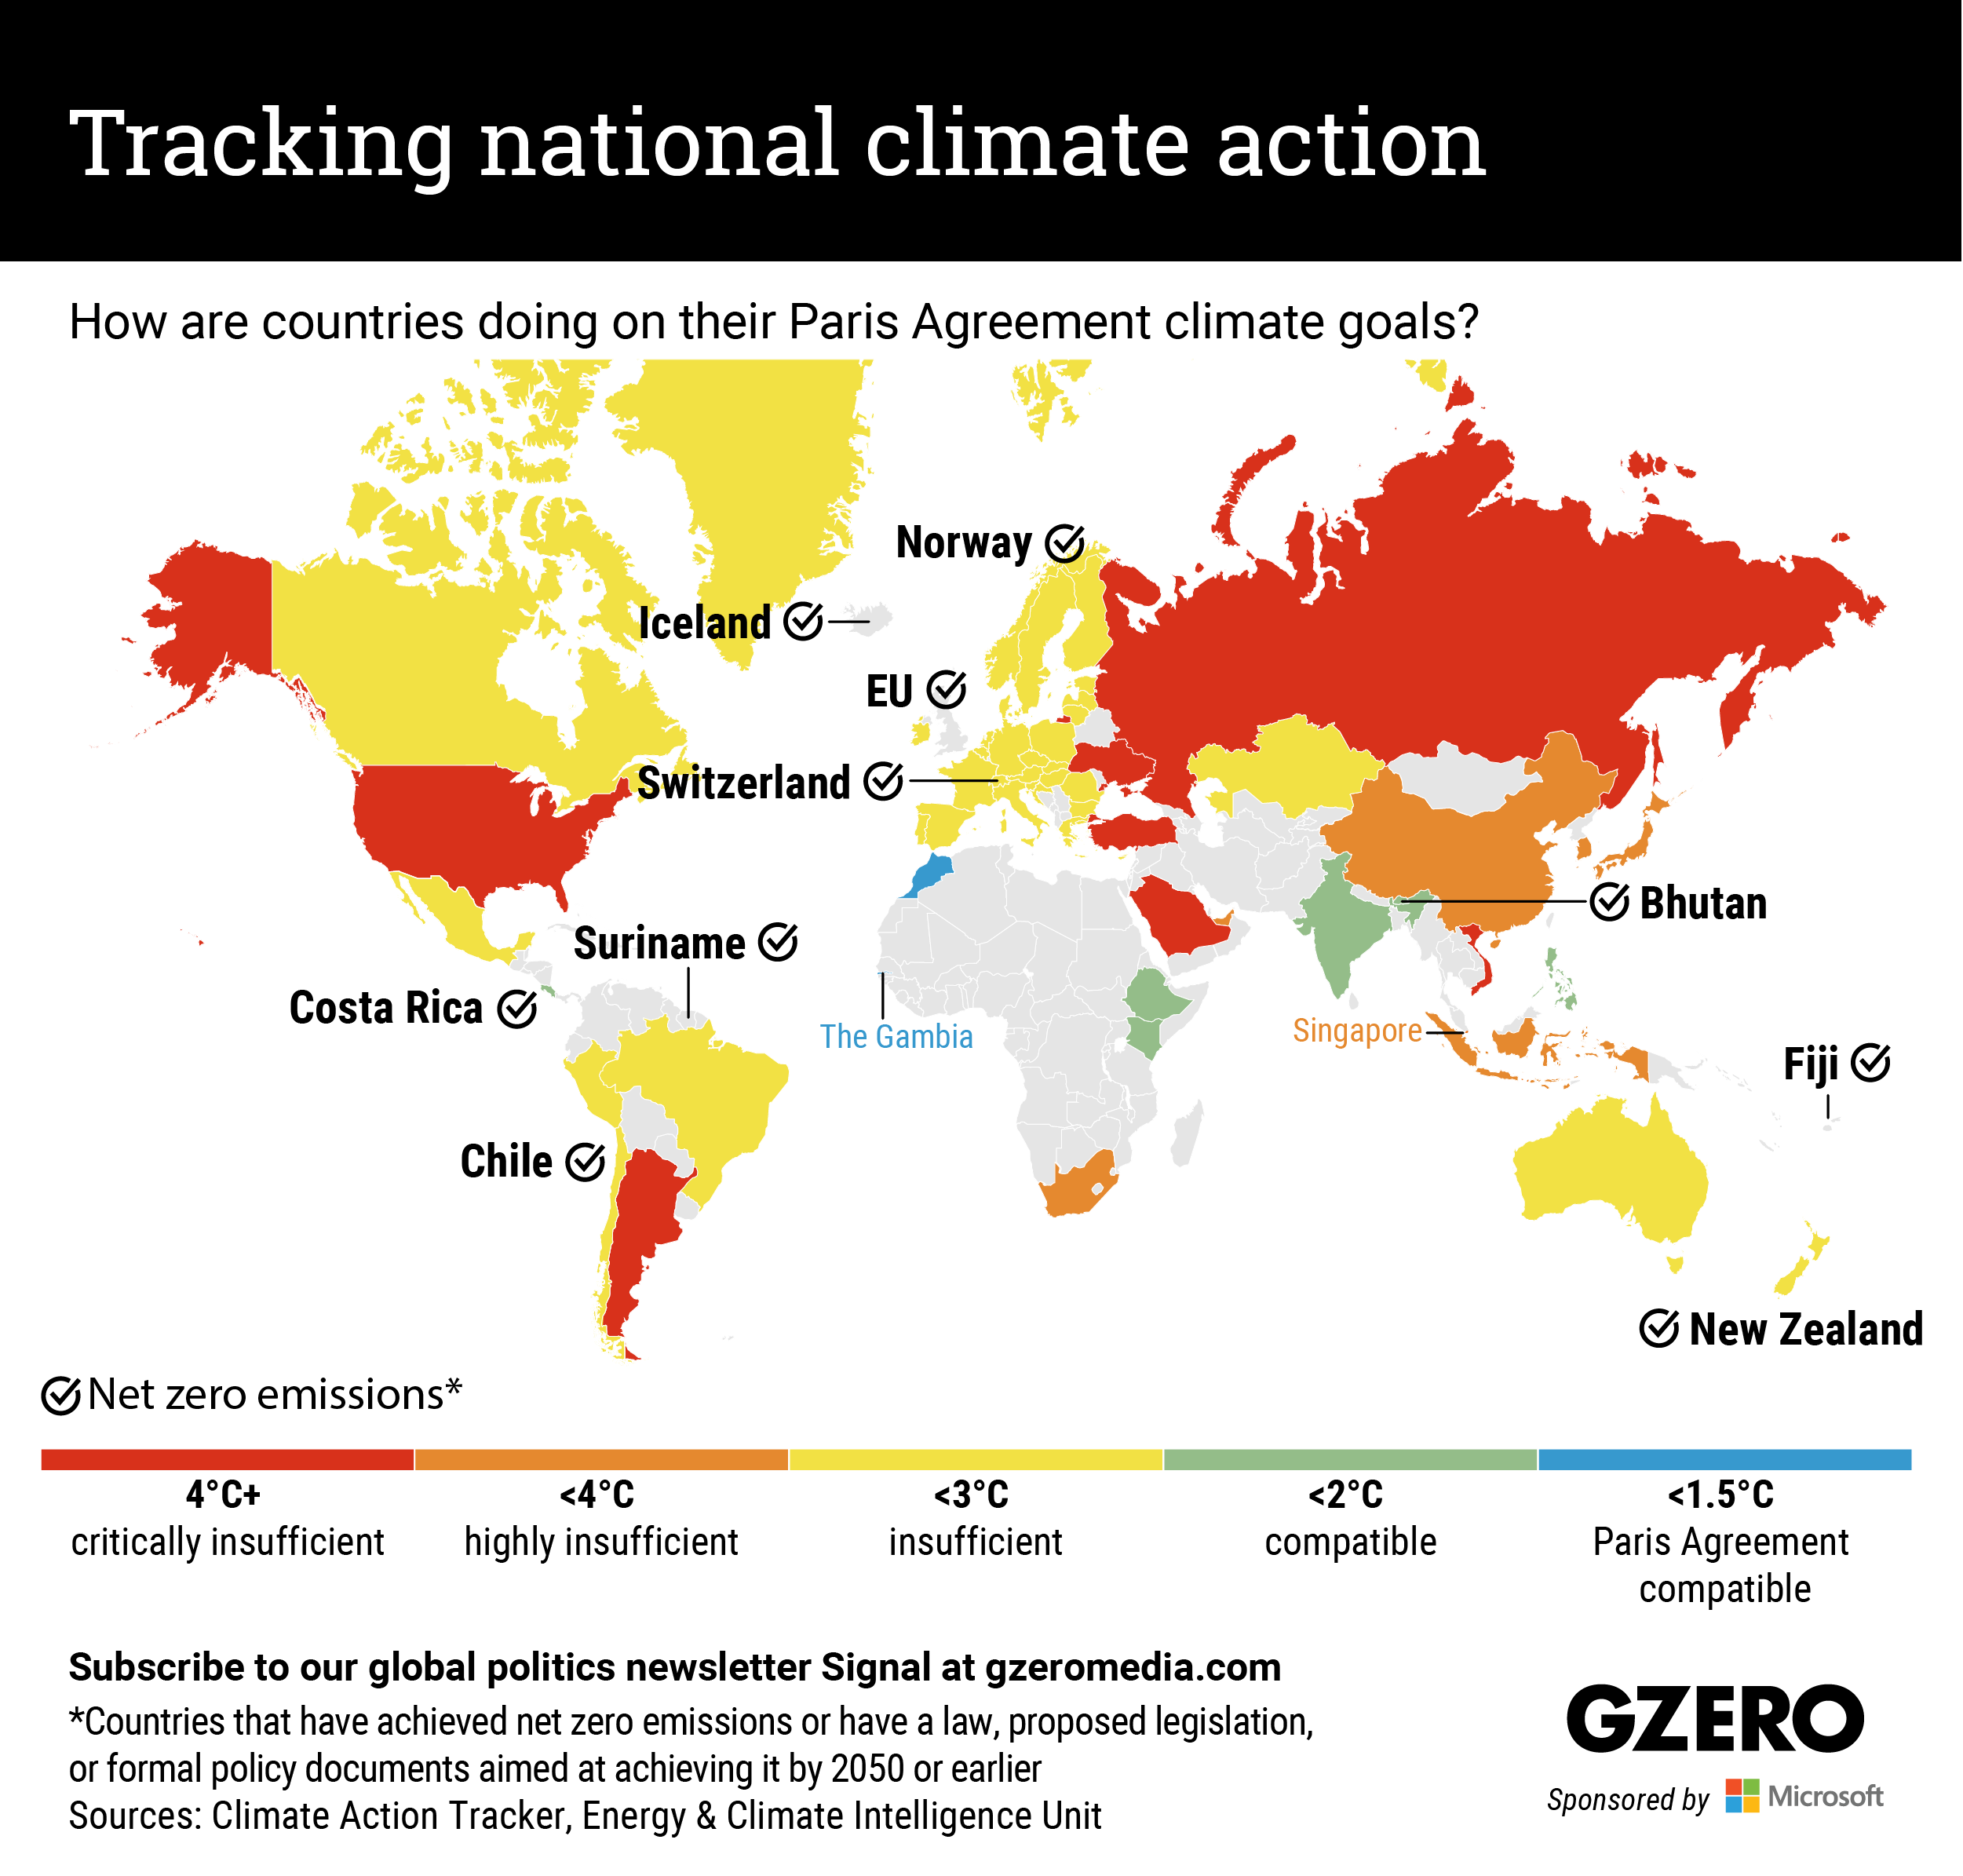 Tracking national climate action: How are countries doing on their Paris Agreement goals?